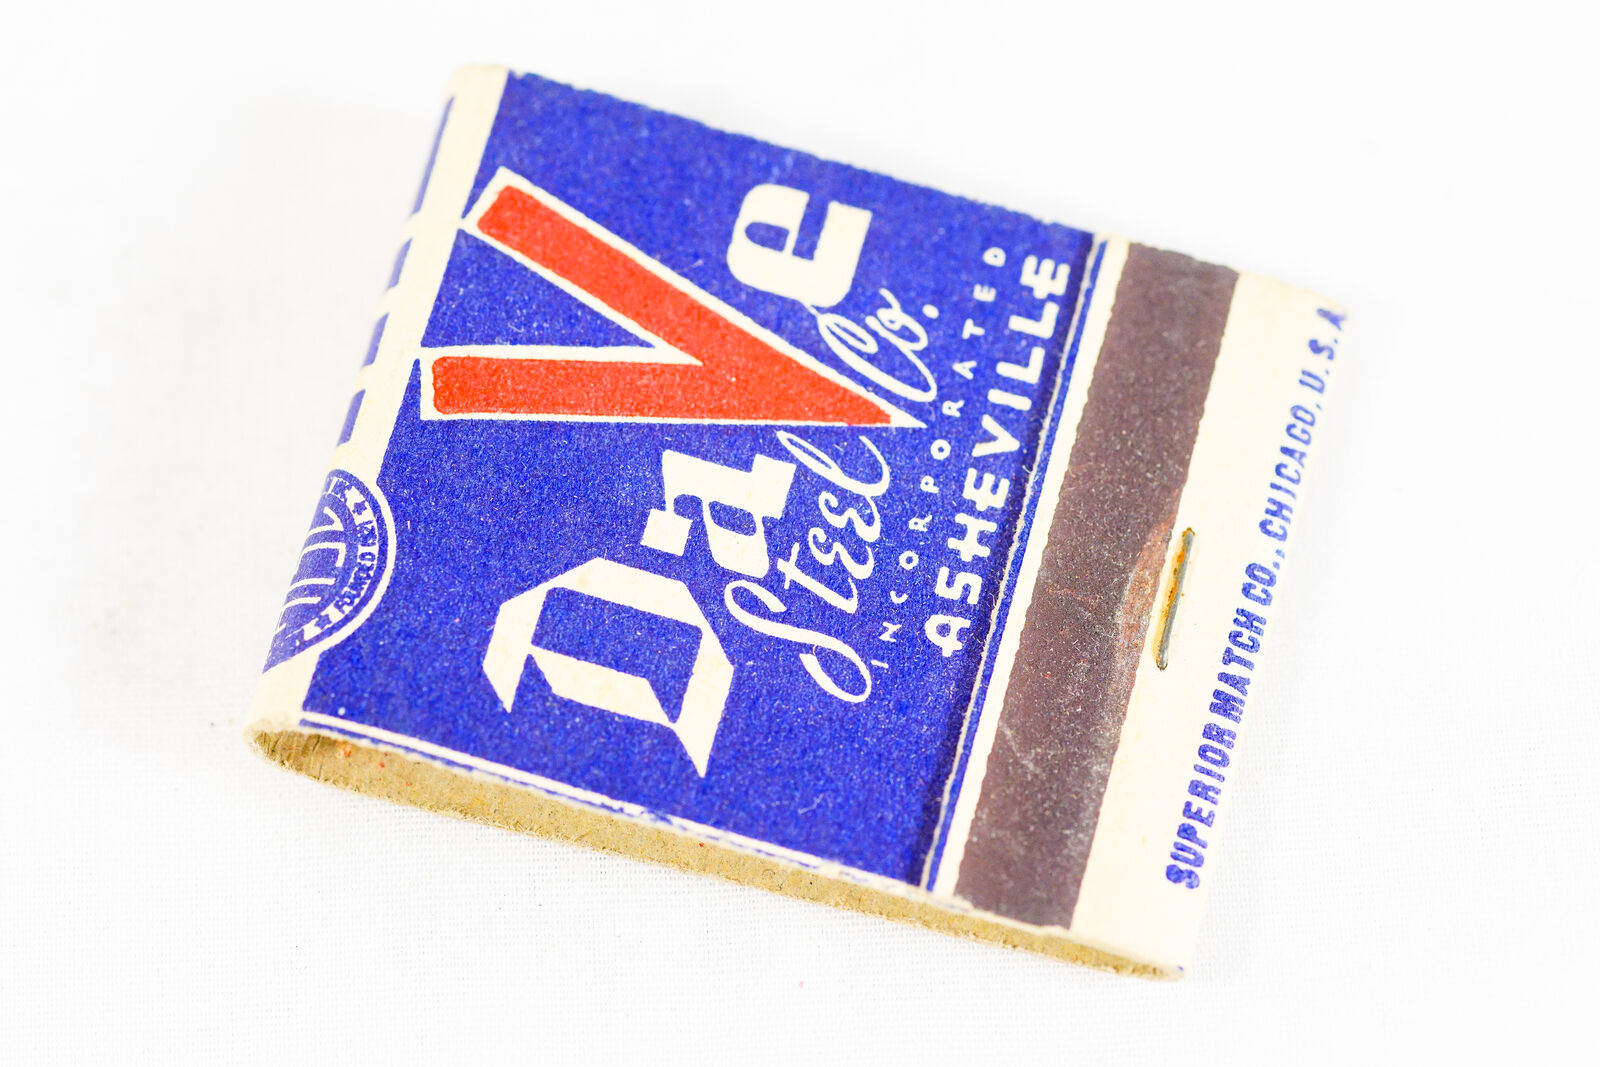 DAVE STEEL CO Asheville NC 1930s Matchbook Advertising -1 Match